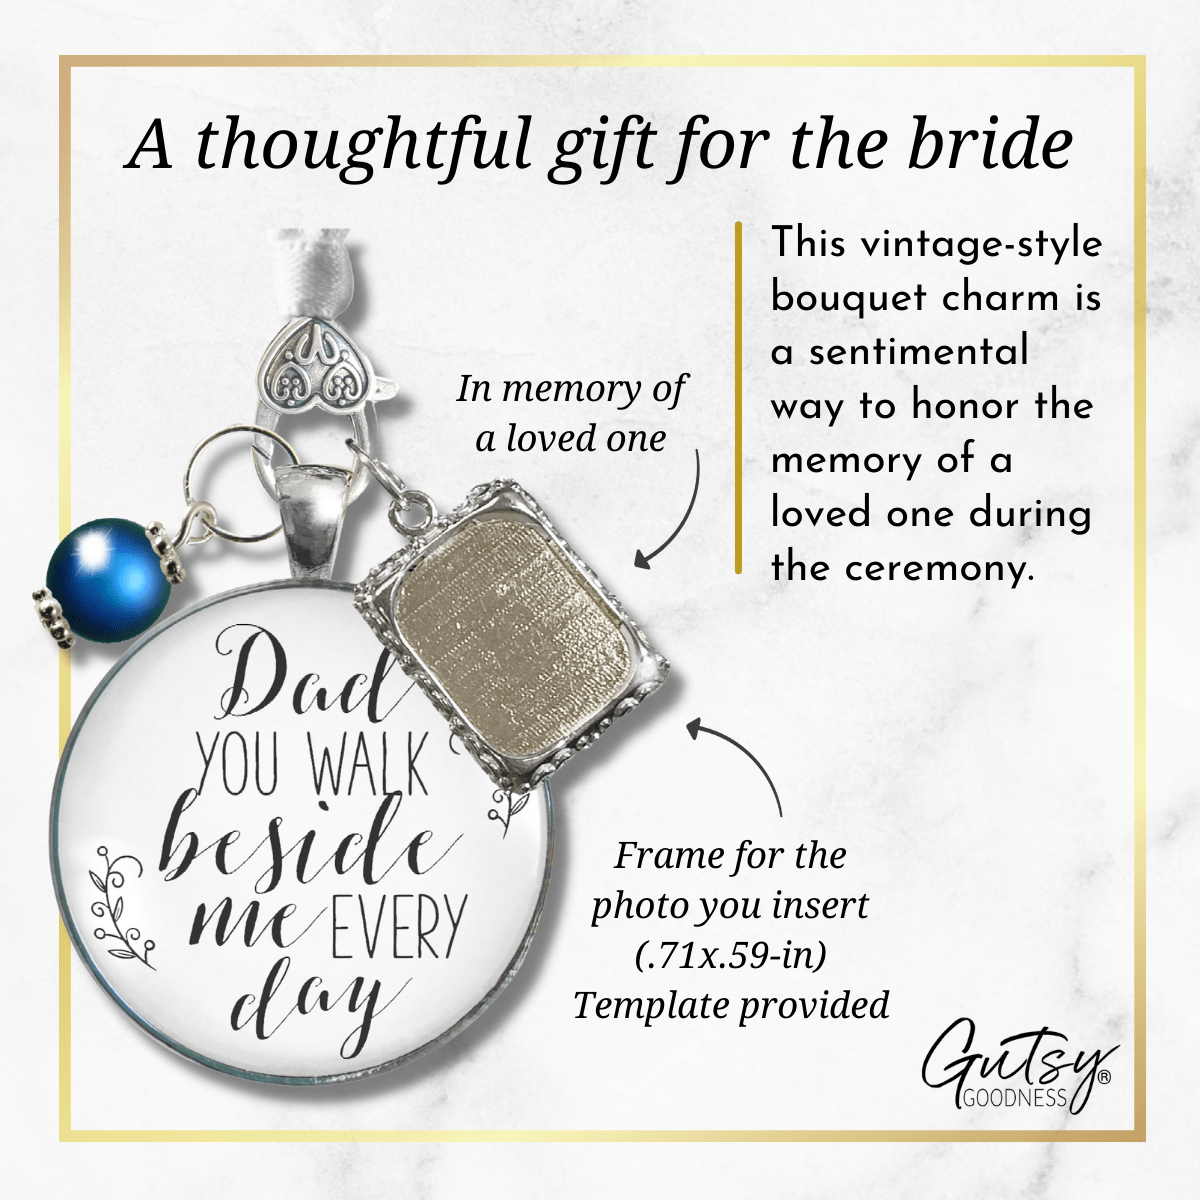 Bridal Bouquet Charm Dad You Walk Beside Me White Wedding Pendant Father Memorial Photo Silver Finish Jewelry - Gutsy Goodness Handmade Jewelry Gifts